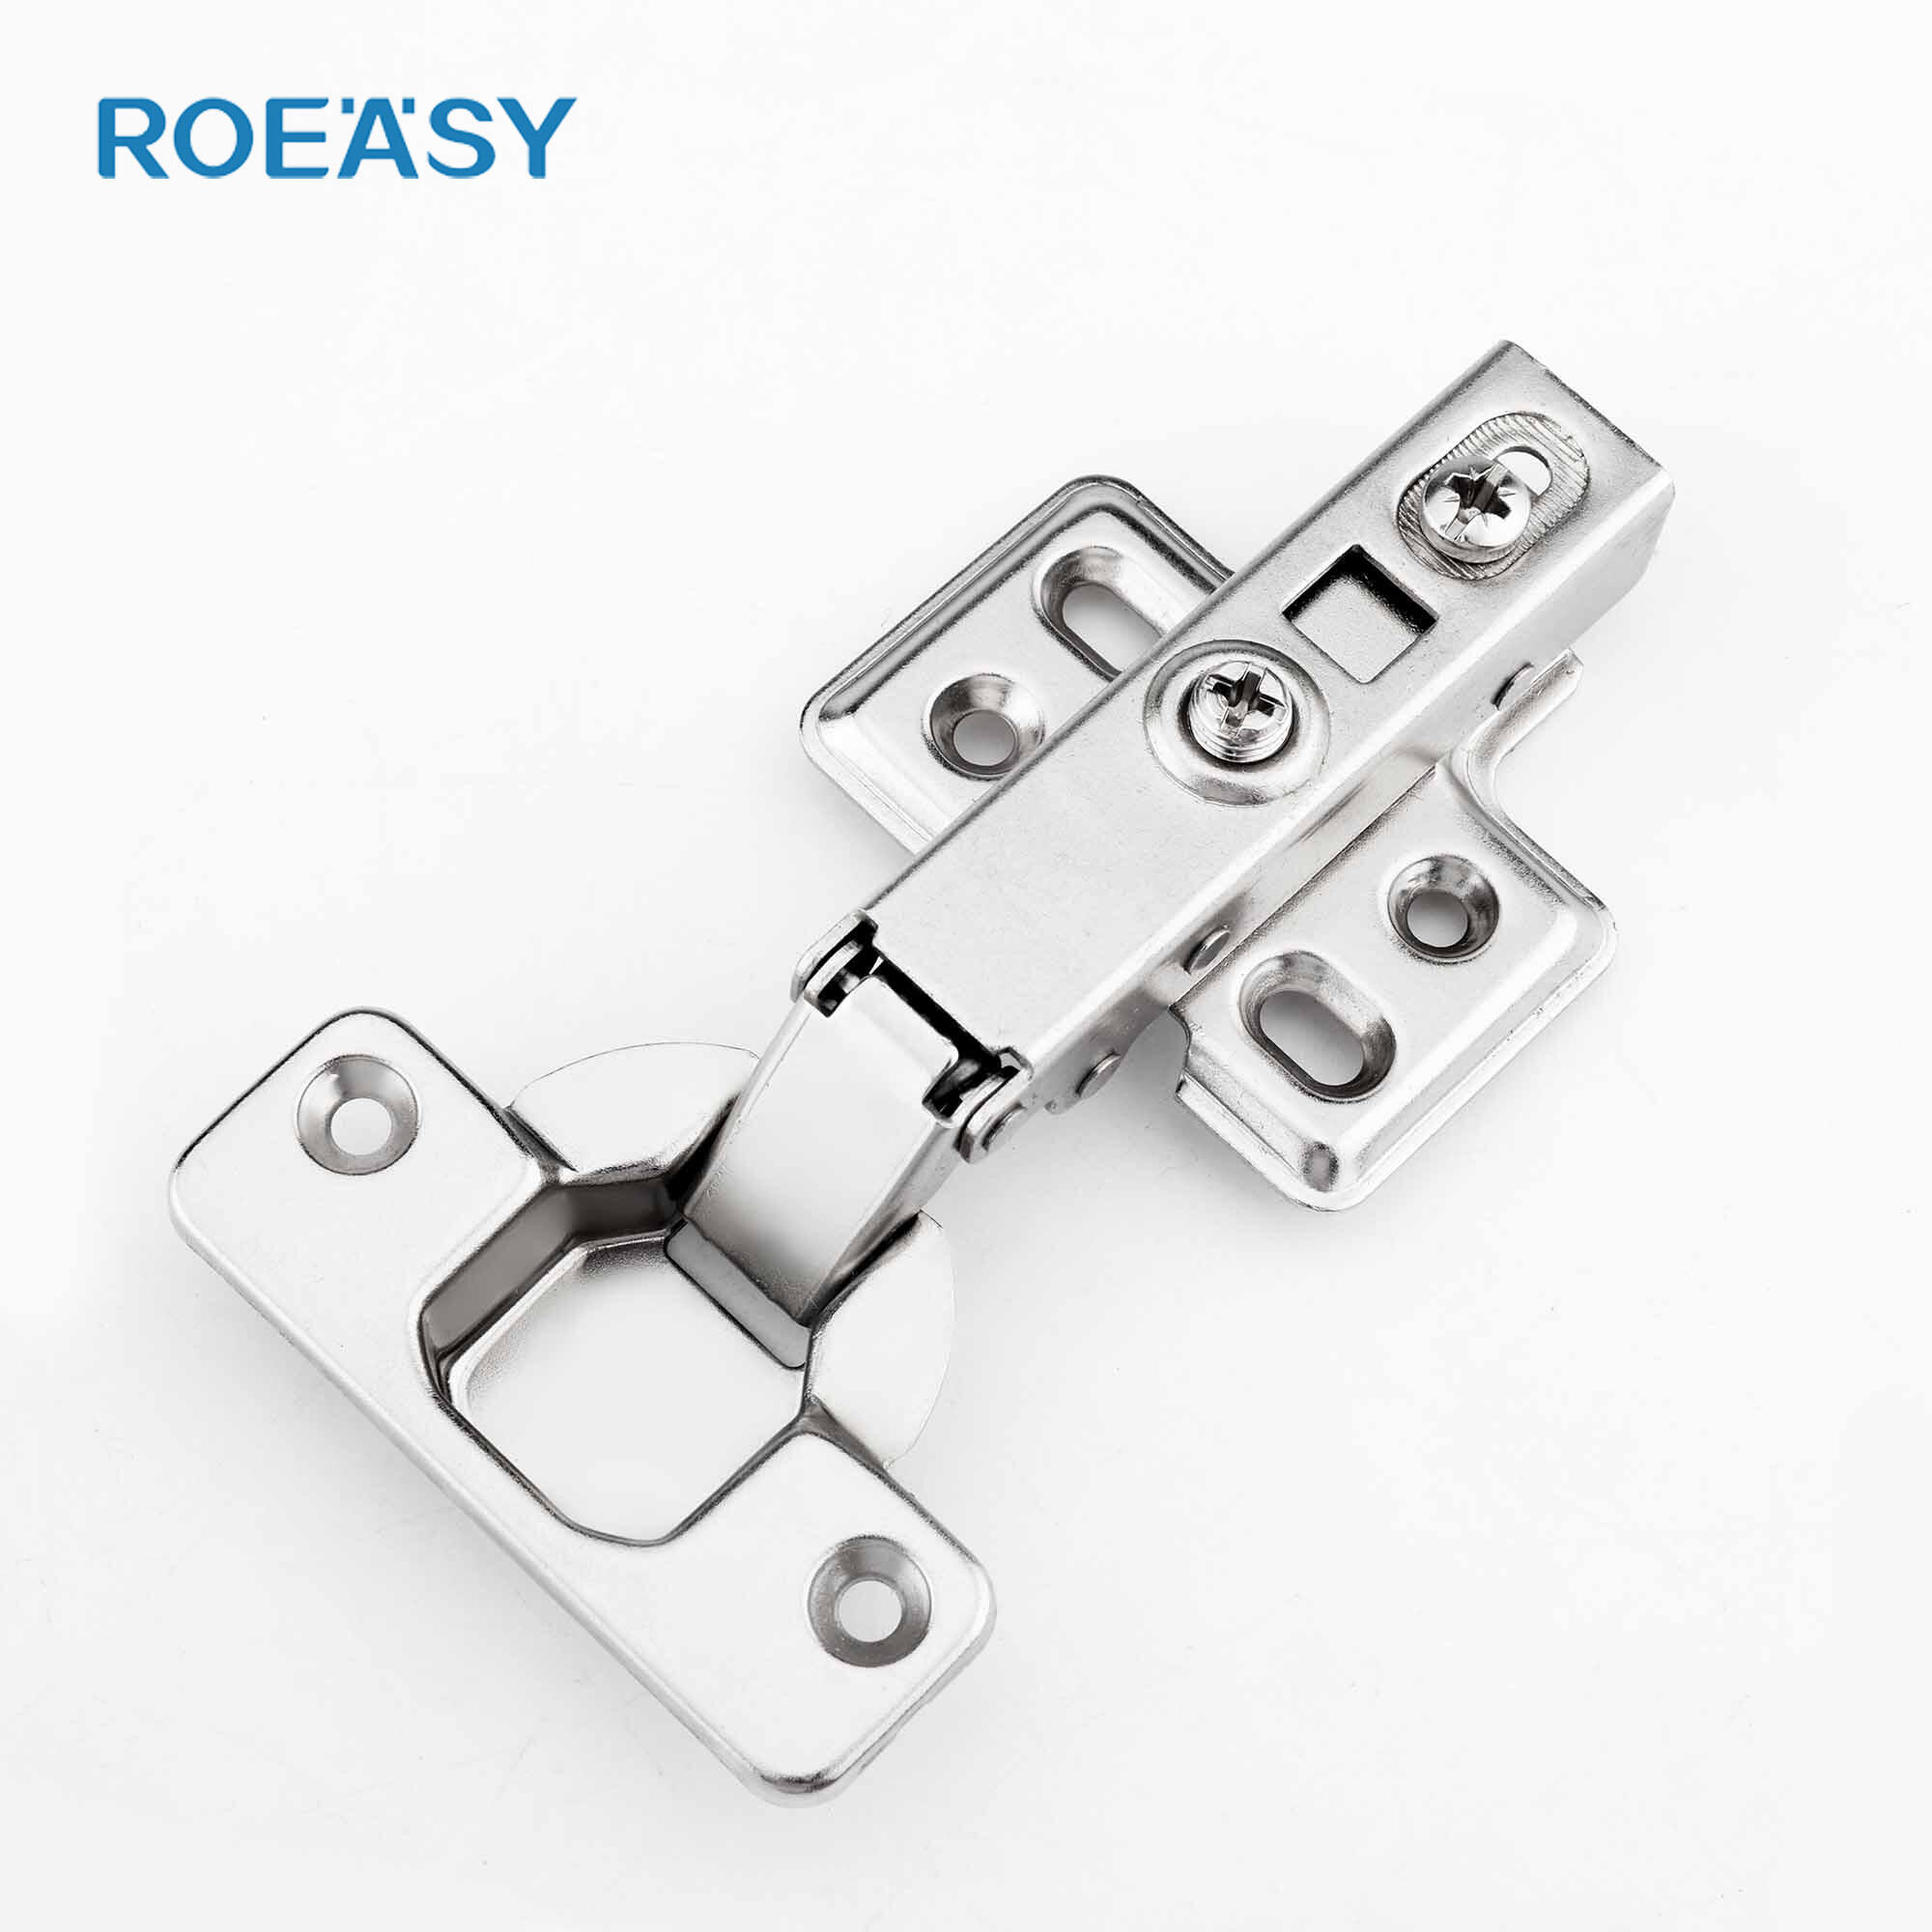 Roeasy CH-291B 35mm cup 95 degree soft close inseparable cabinet hinge